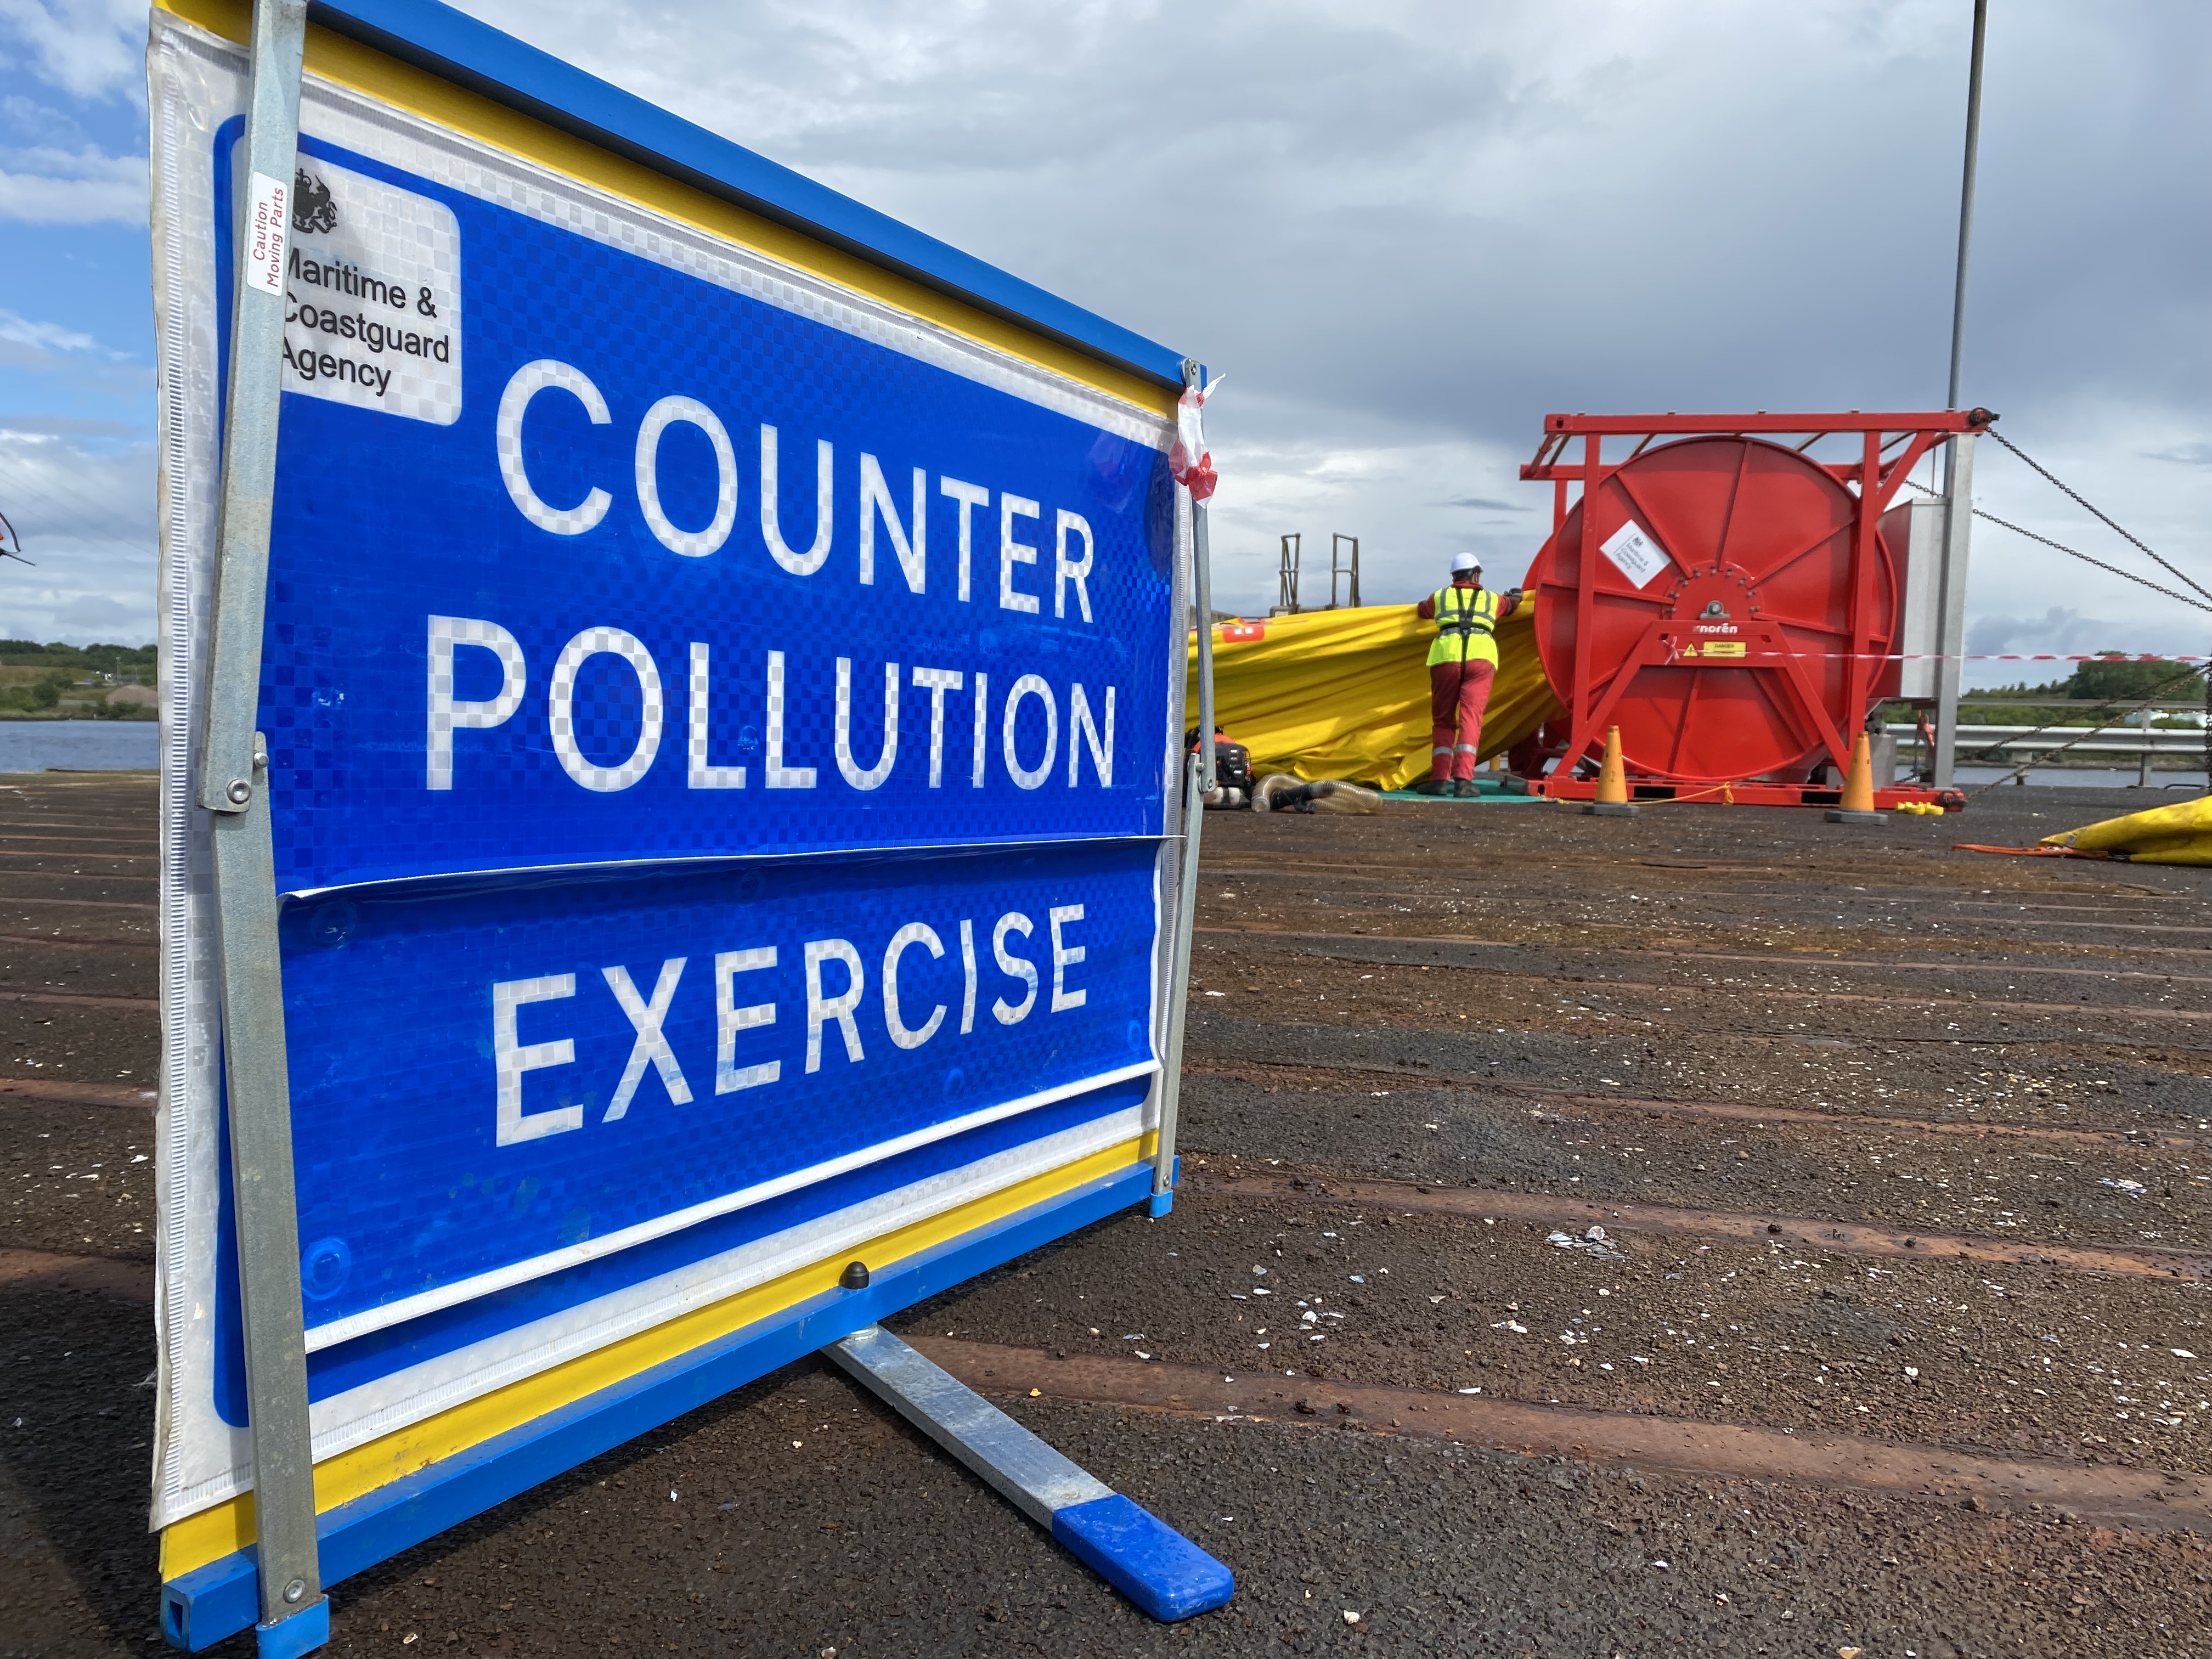 A counter-pollution exercise sign at the Port of Tyne